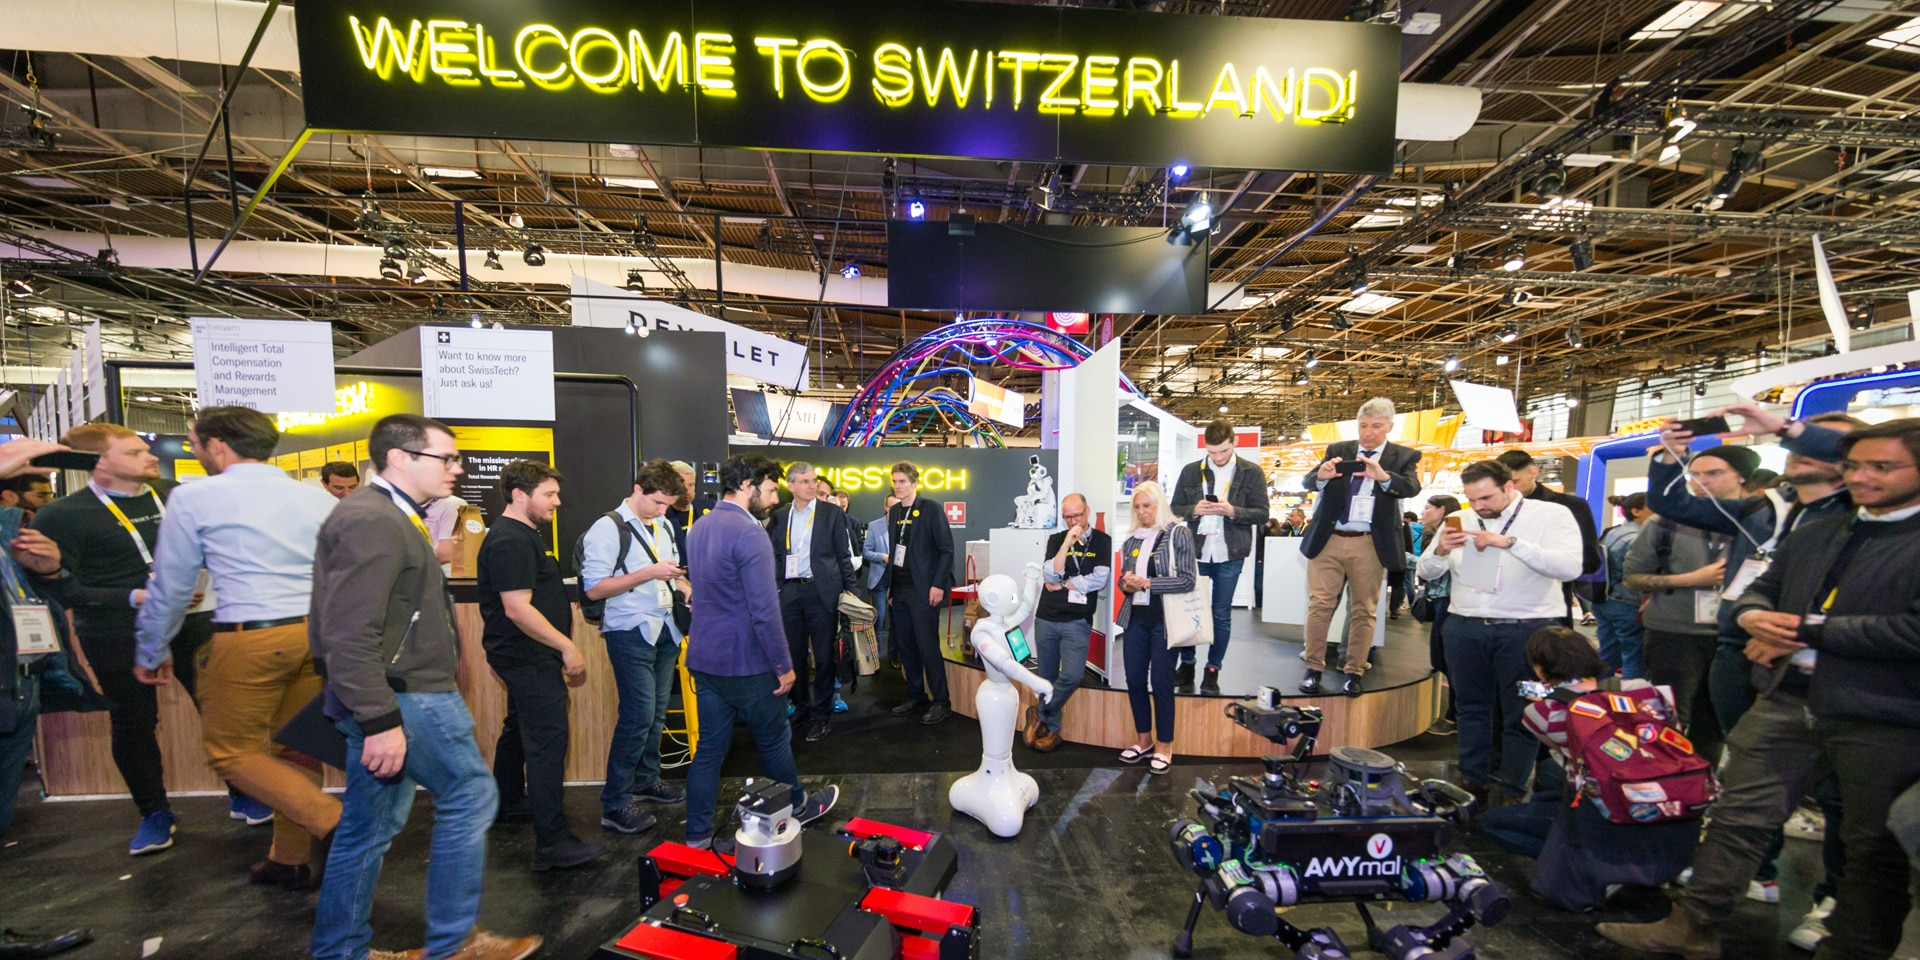 In an exhibition hall, people look at drones, robots and innovative technologies. Above them is a sign reading "Welcome to Switzerland".